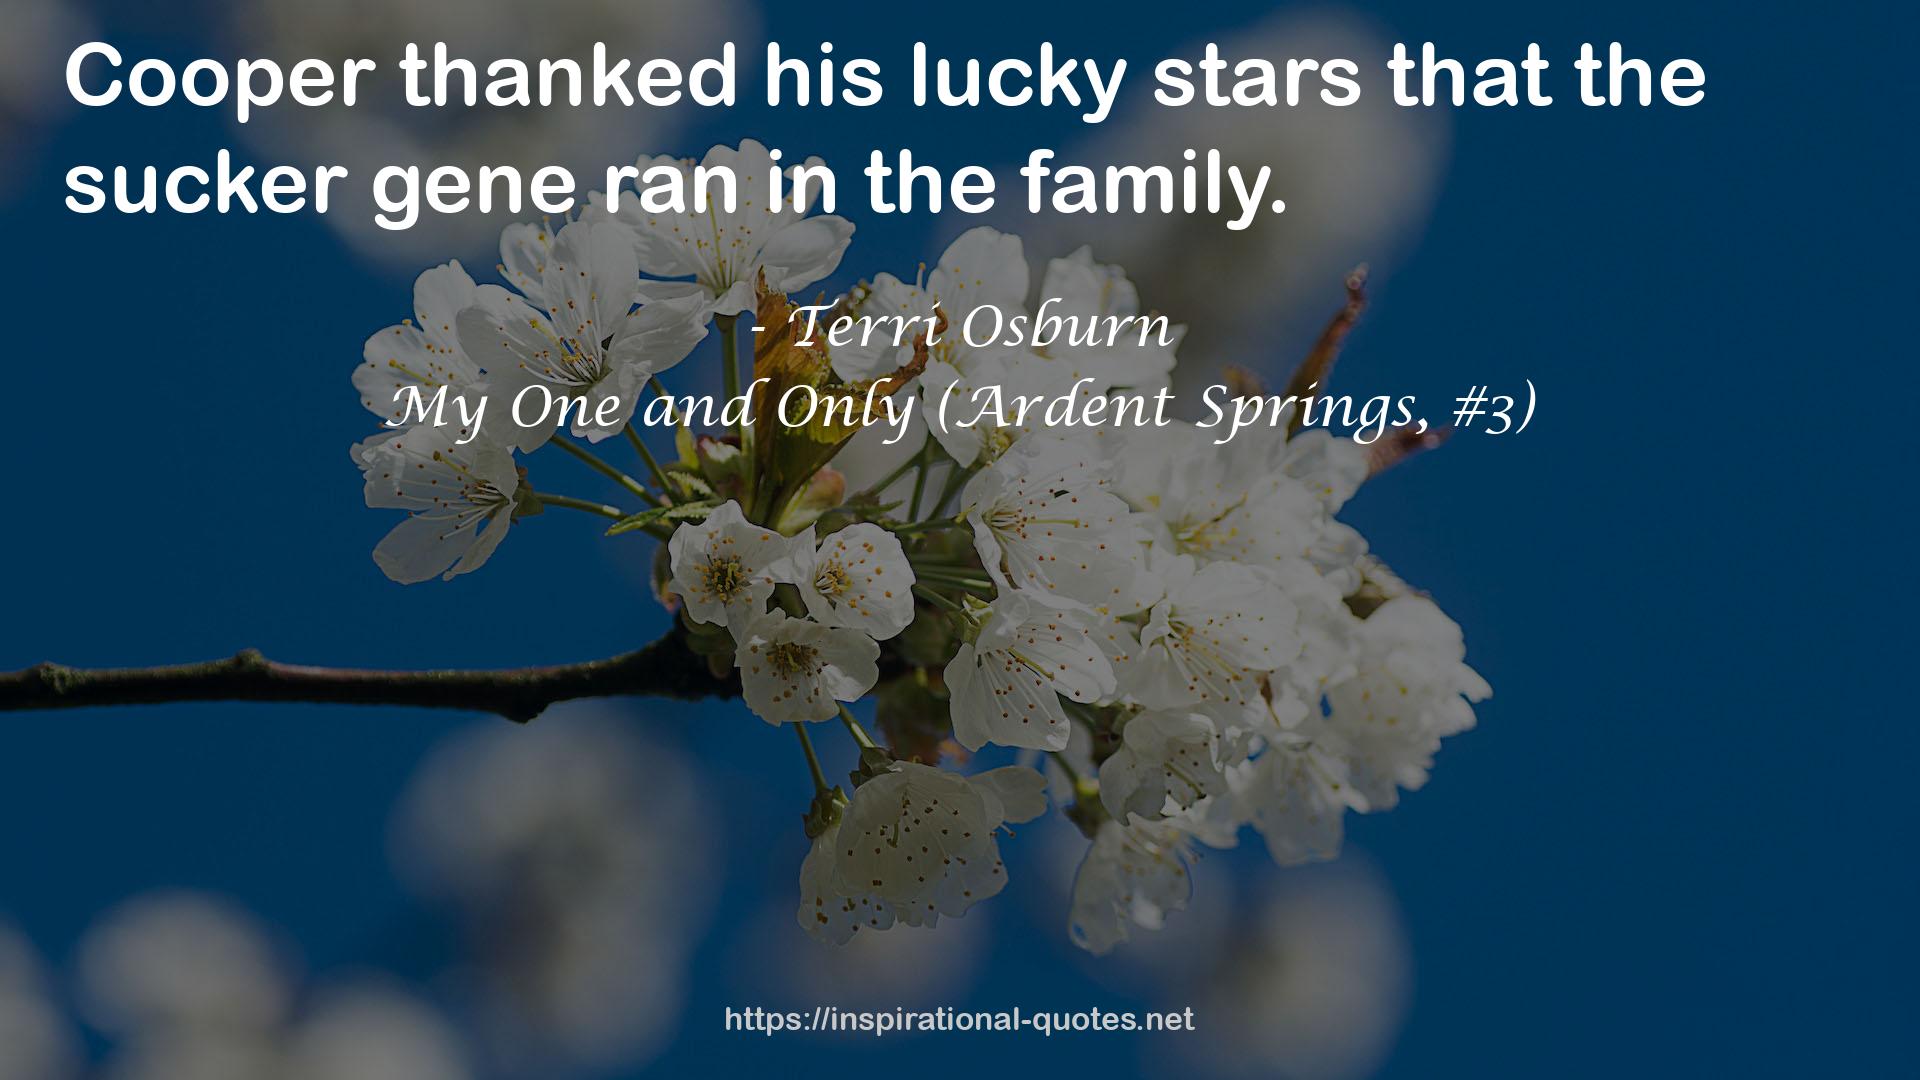 My One and Only (Ardent Springs, #3) QUOTES